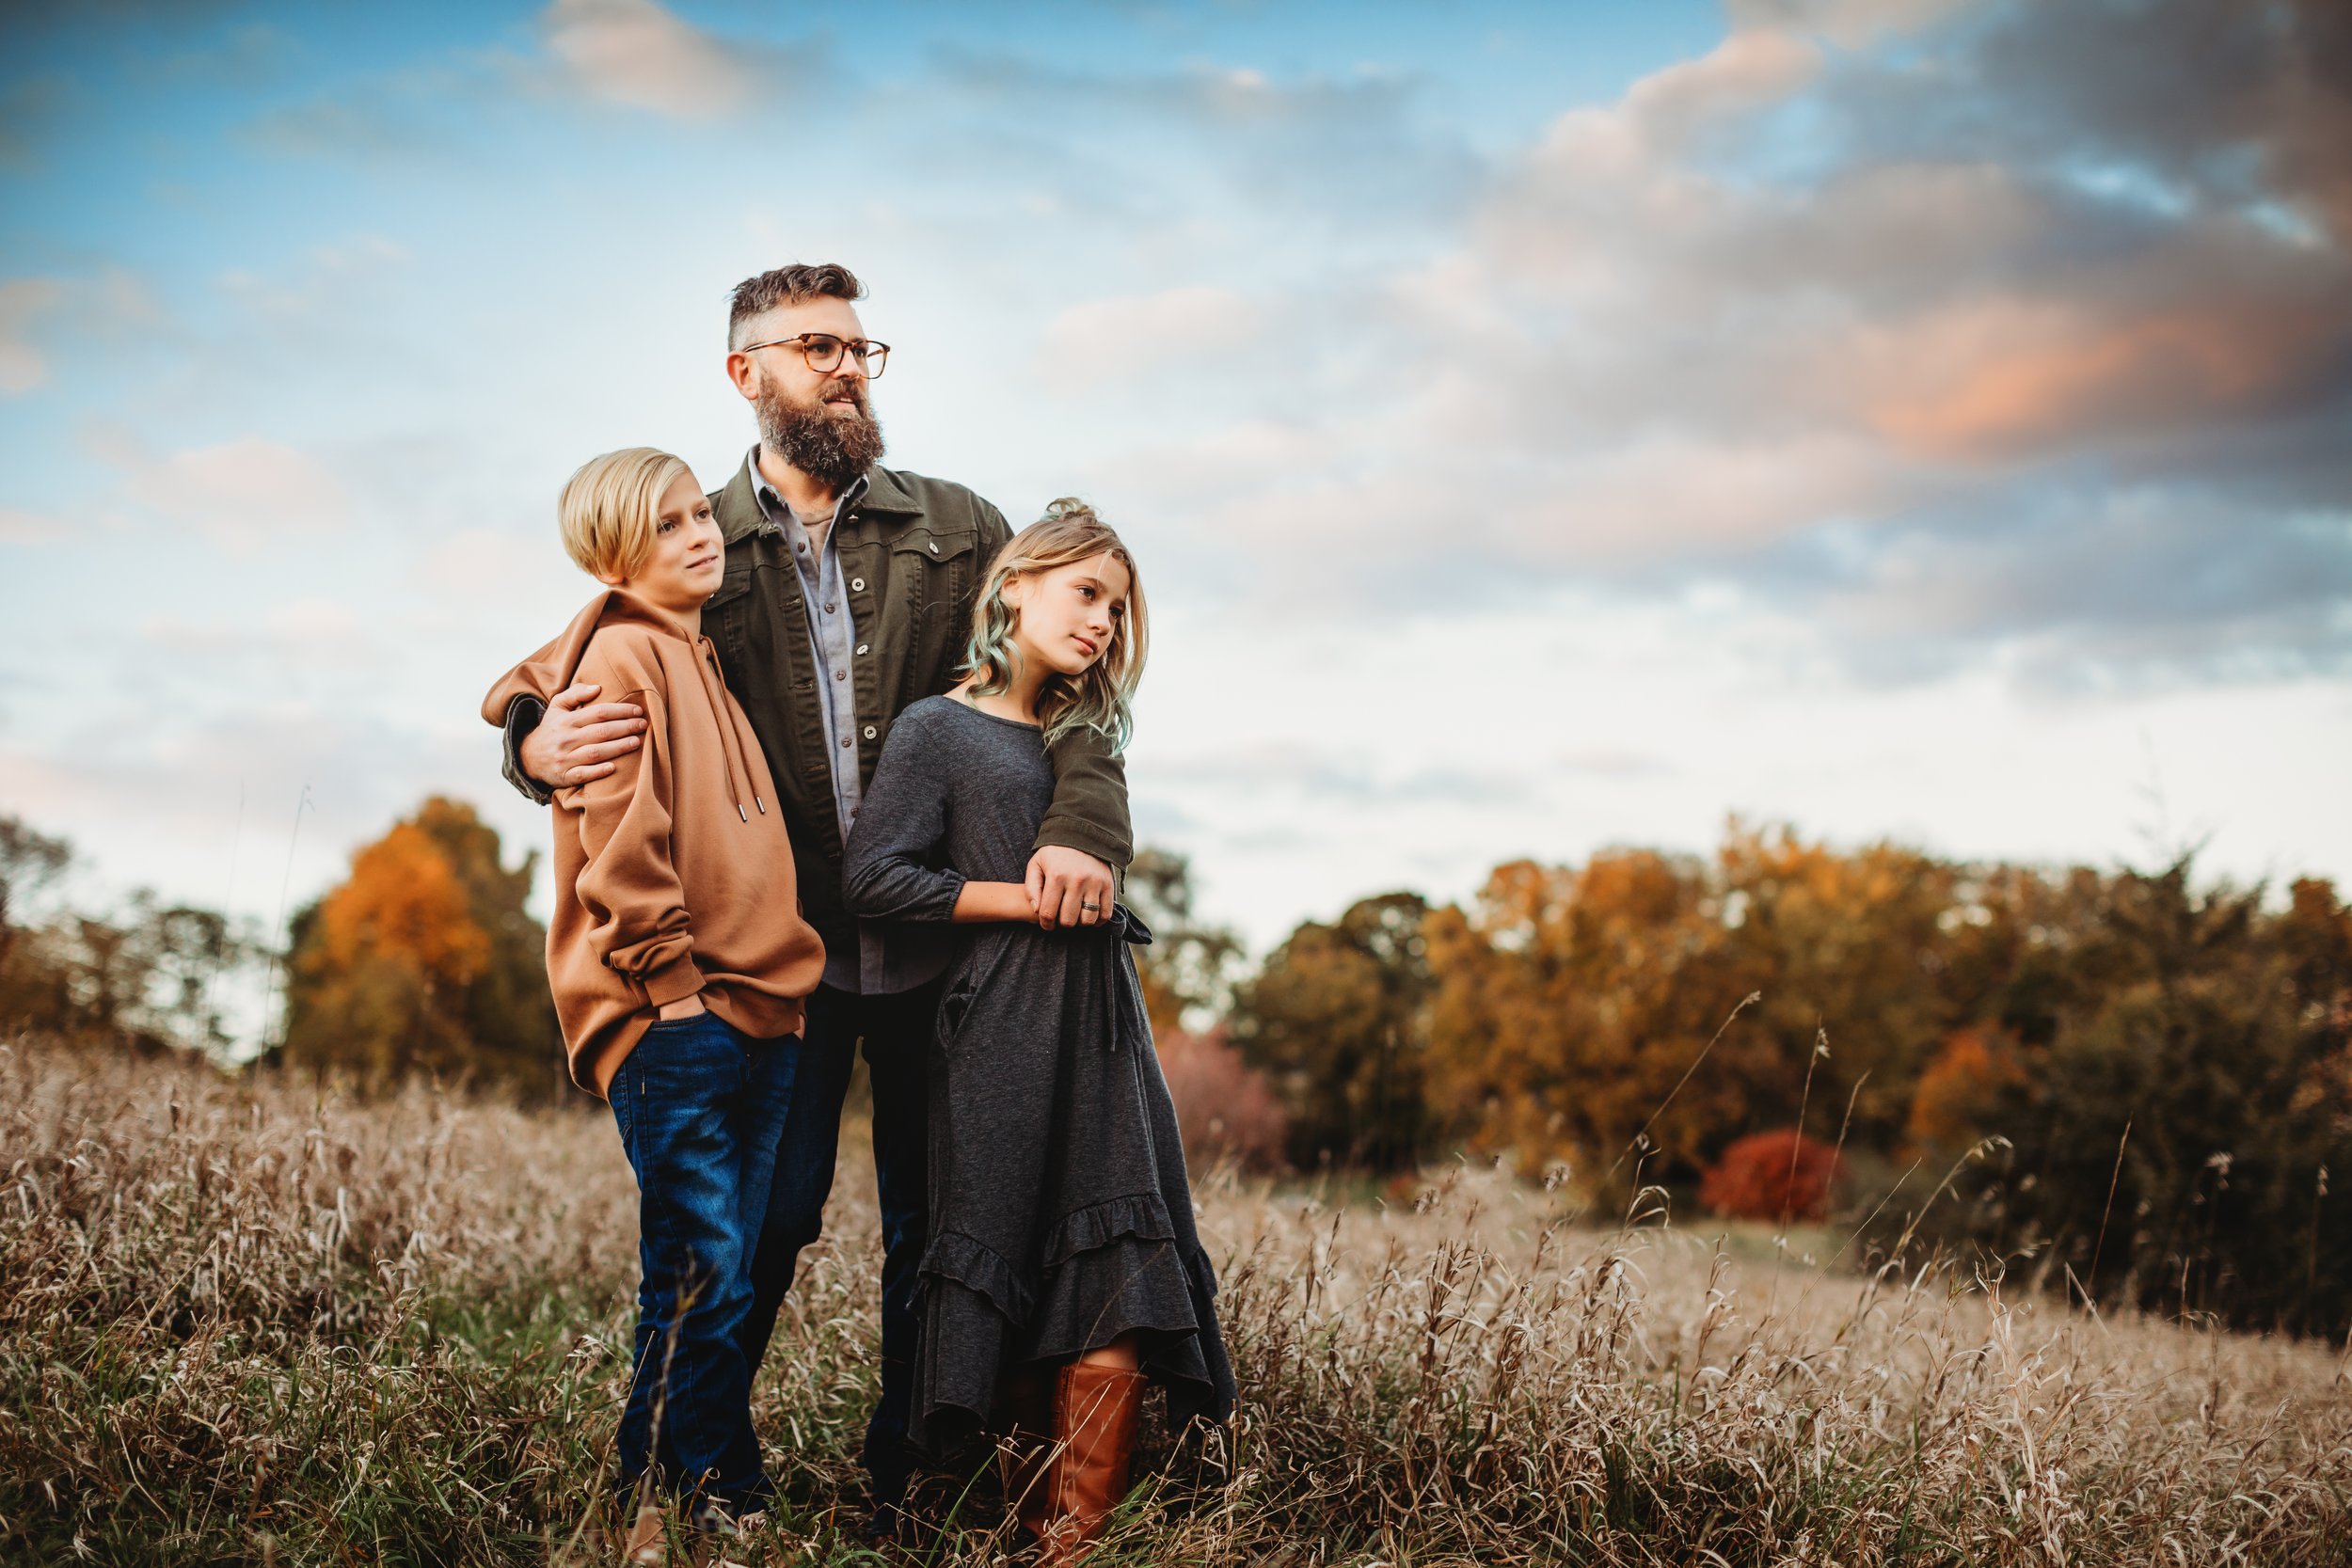  Teala Ward Photography captures a father hugging his daughter and son at a nature park. natural family photos unposed portraits #tealawardphotography #tealawardfamilies #springvalleyillinois #springvalleyphotographers #Illinoisfamilyphotographer 